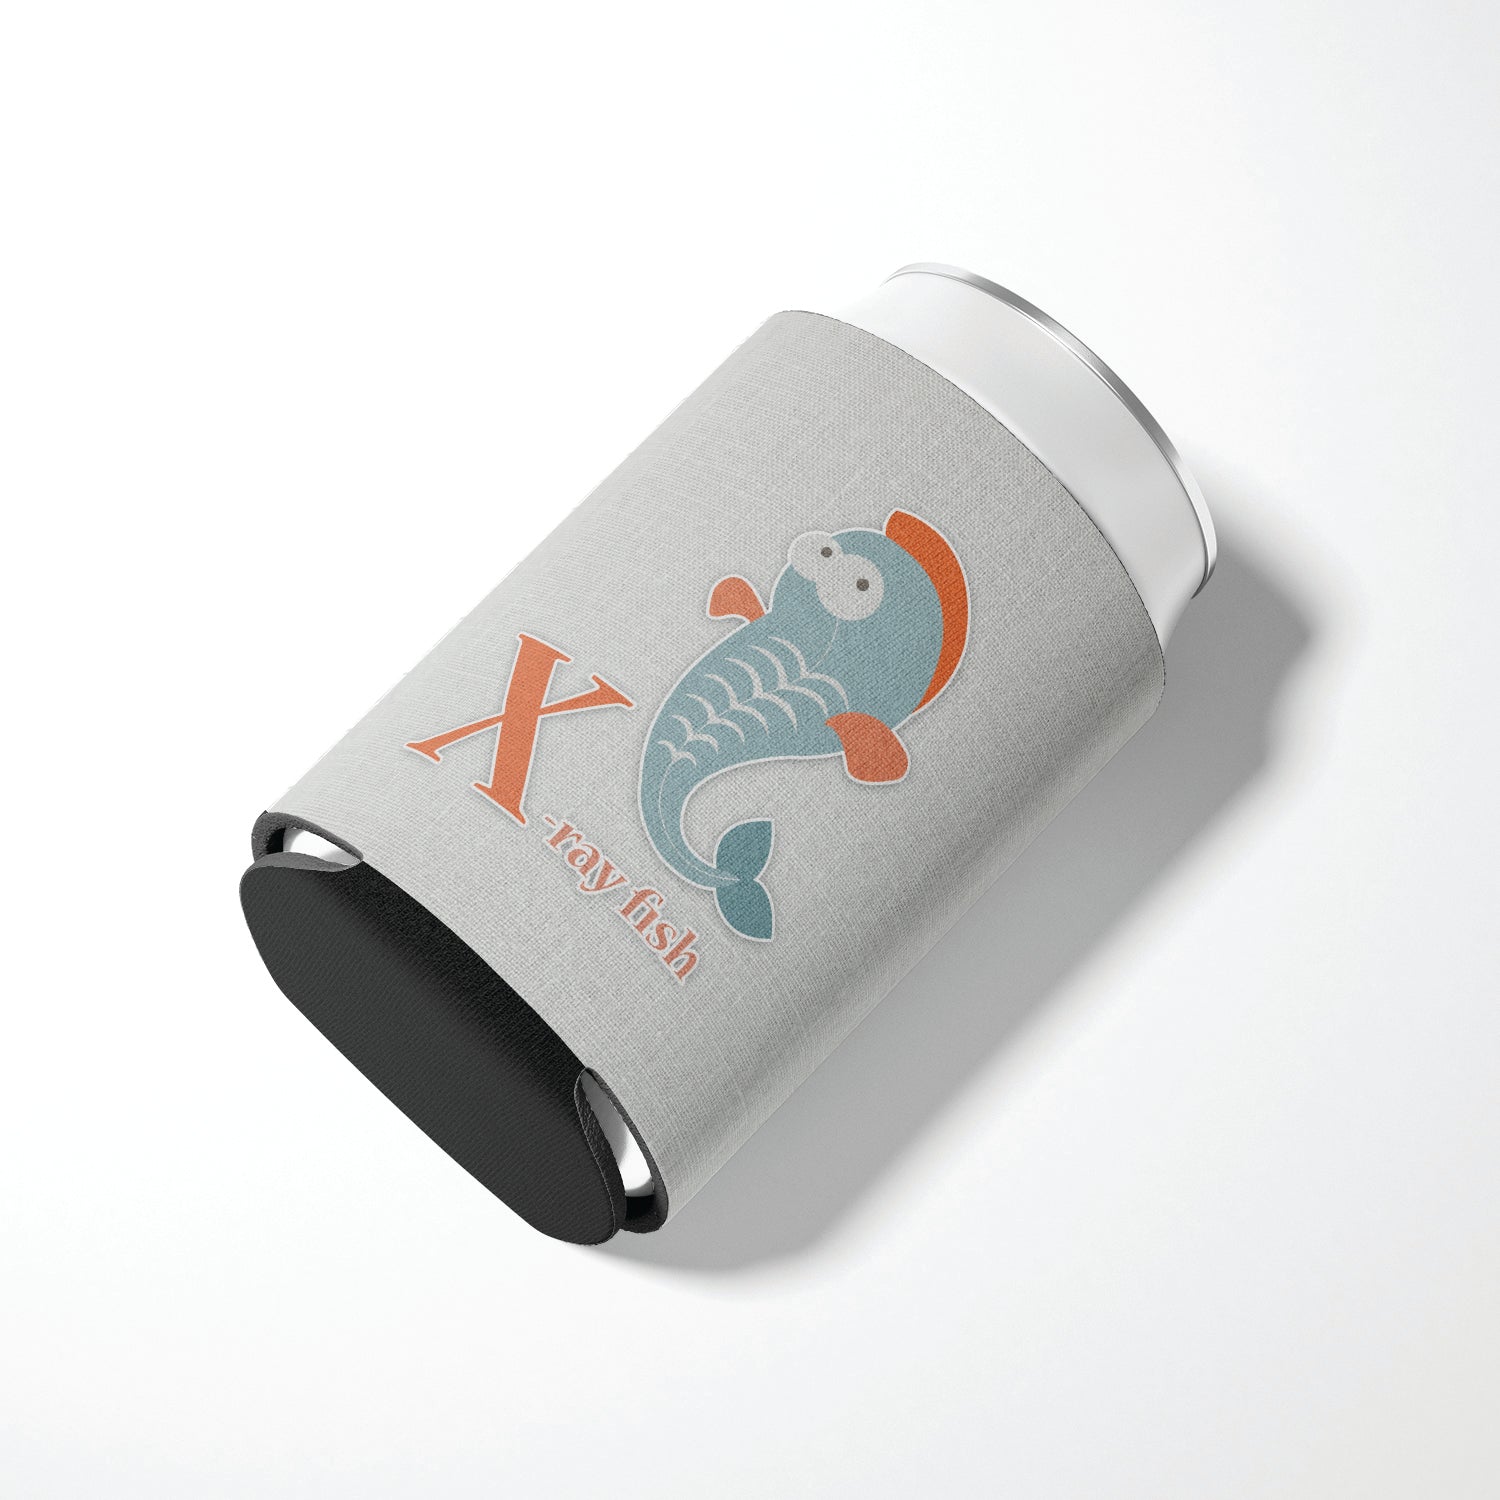 Alphabet X for Xray Fish Can or Bottle Hugger BB5749CC  the-store.com.